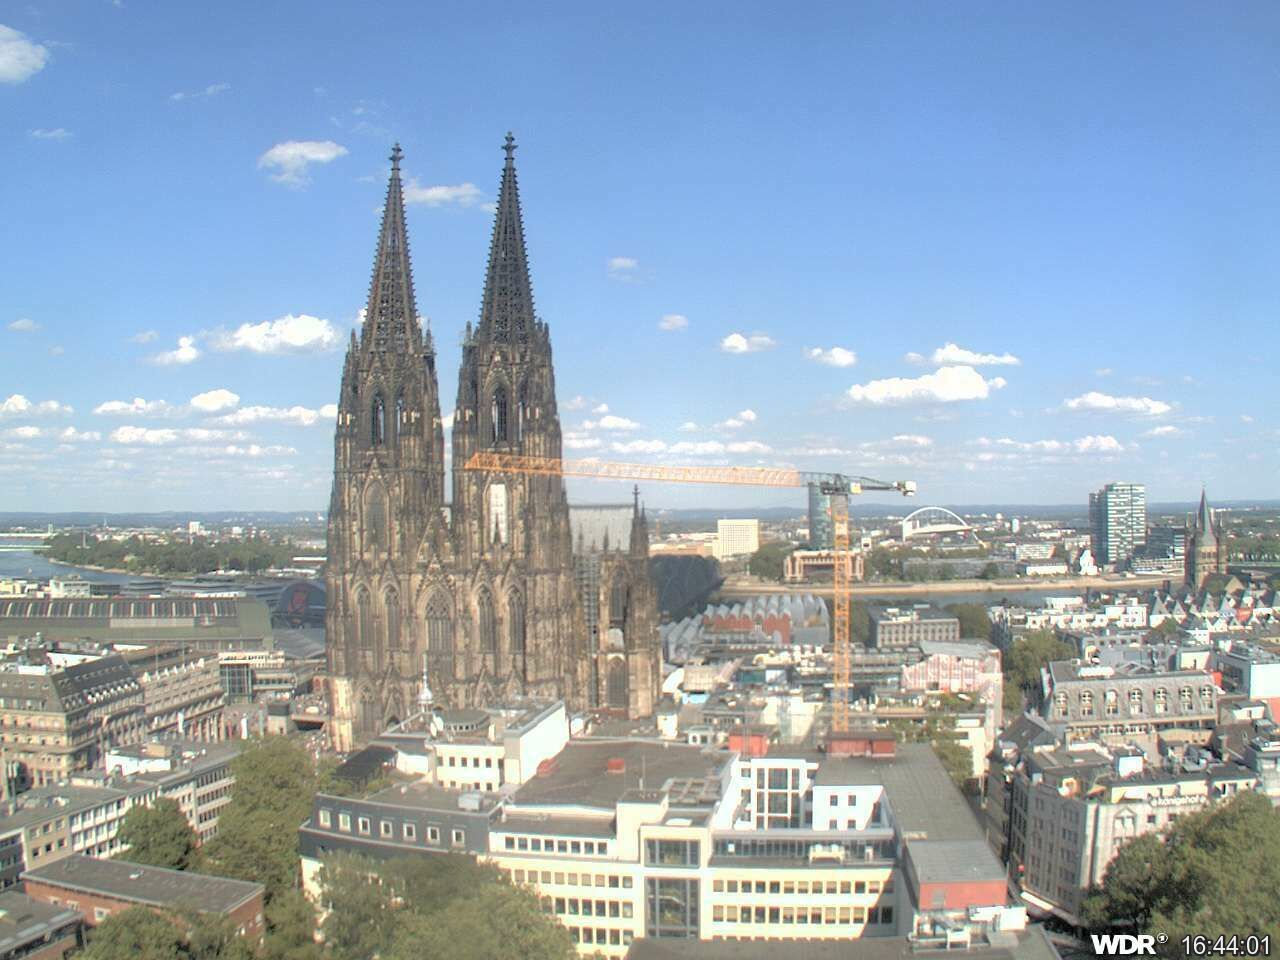 Cologne Wed. 16:45